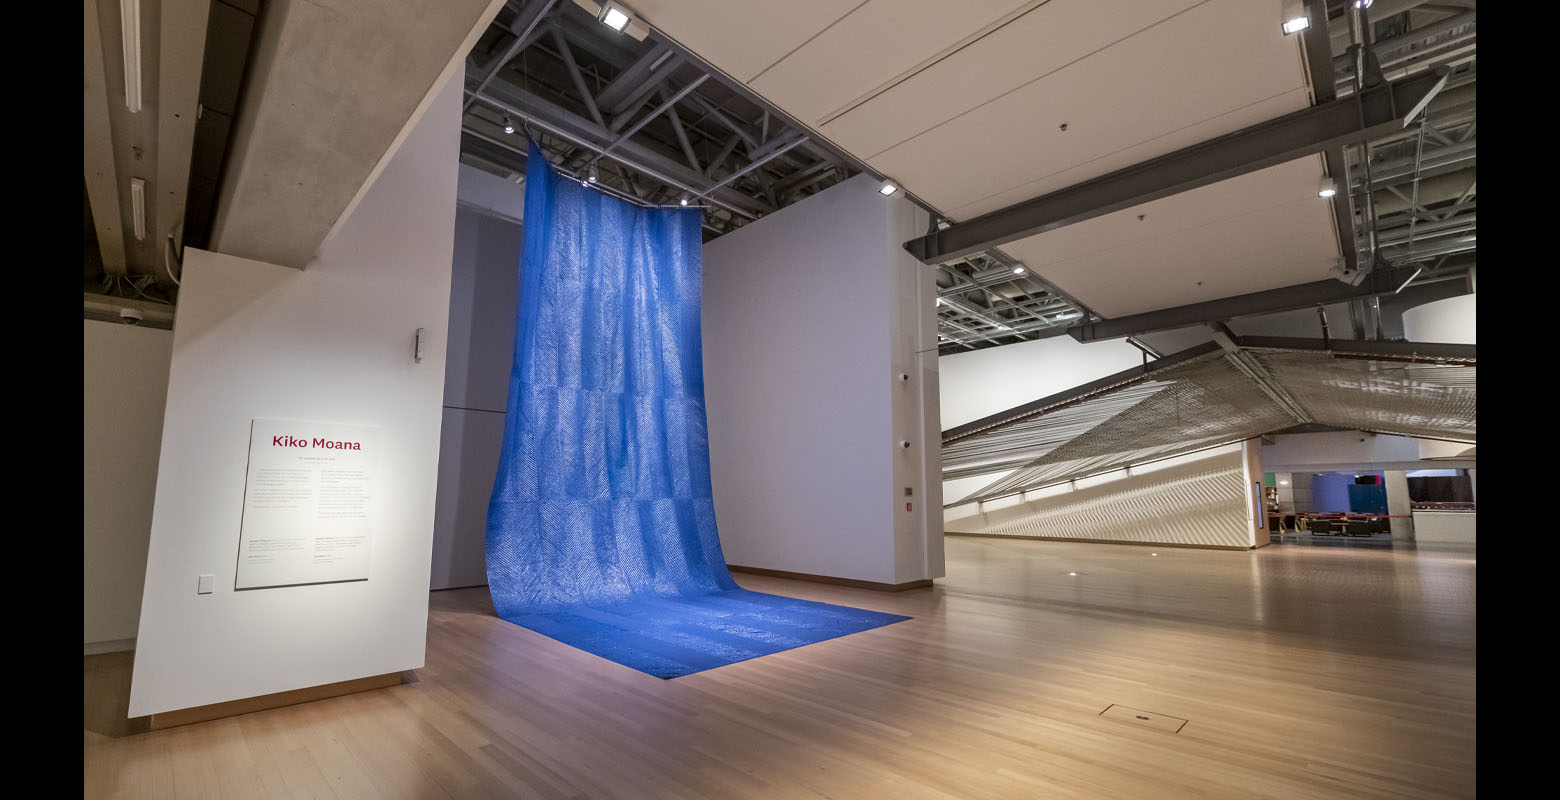 Large sheets of blue tarpaulin stitched together as one hang from the ceiling of the gallery and drape across the floor, resembling a waterfall.